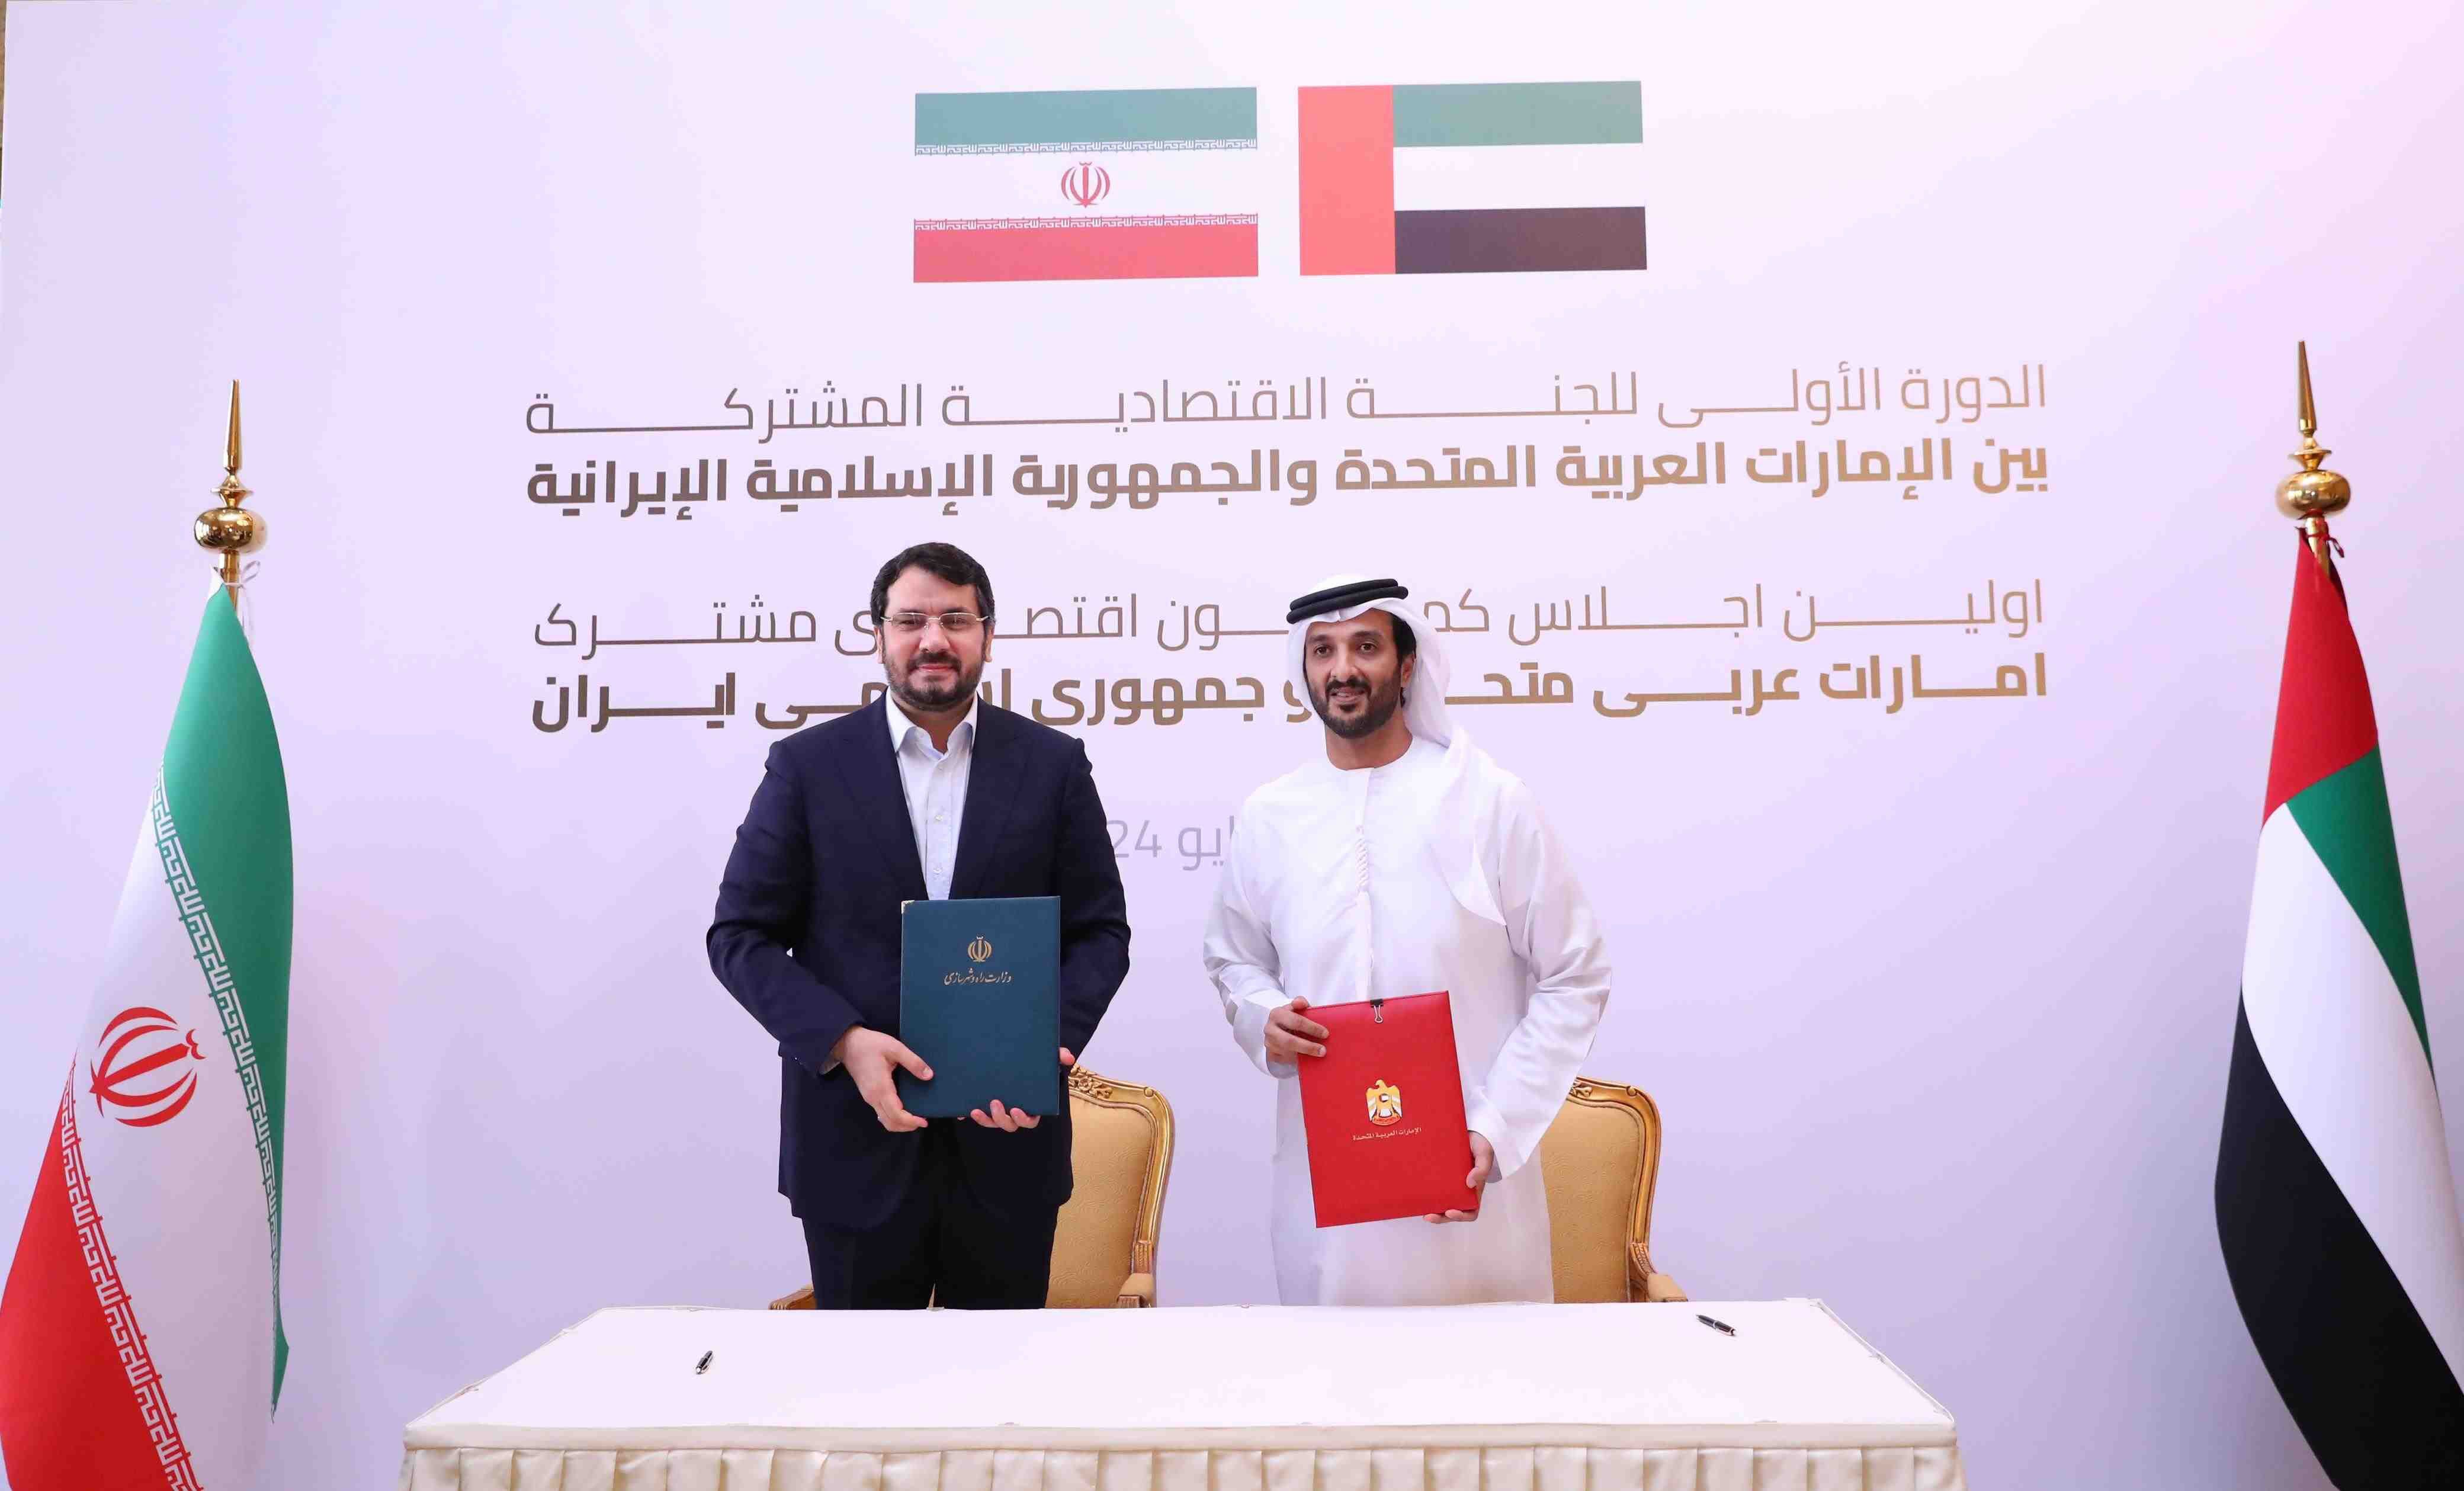 uae and iran agree to bolster economic ties and trade co-operation